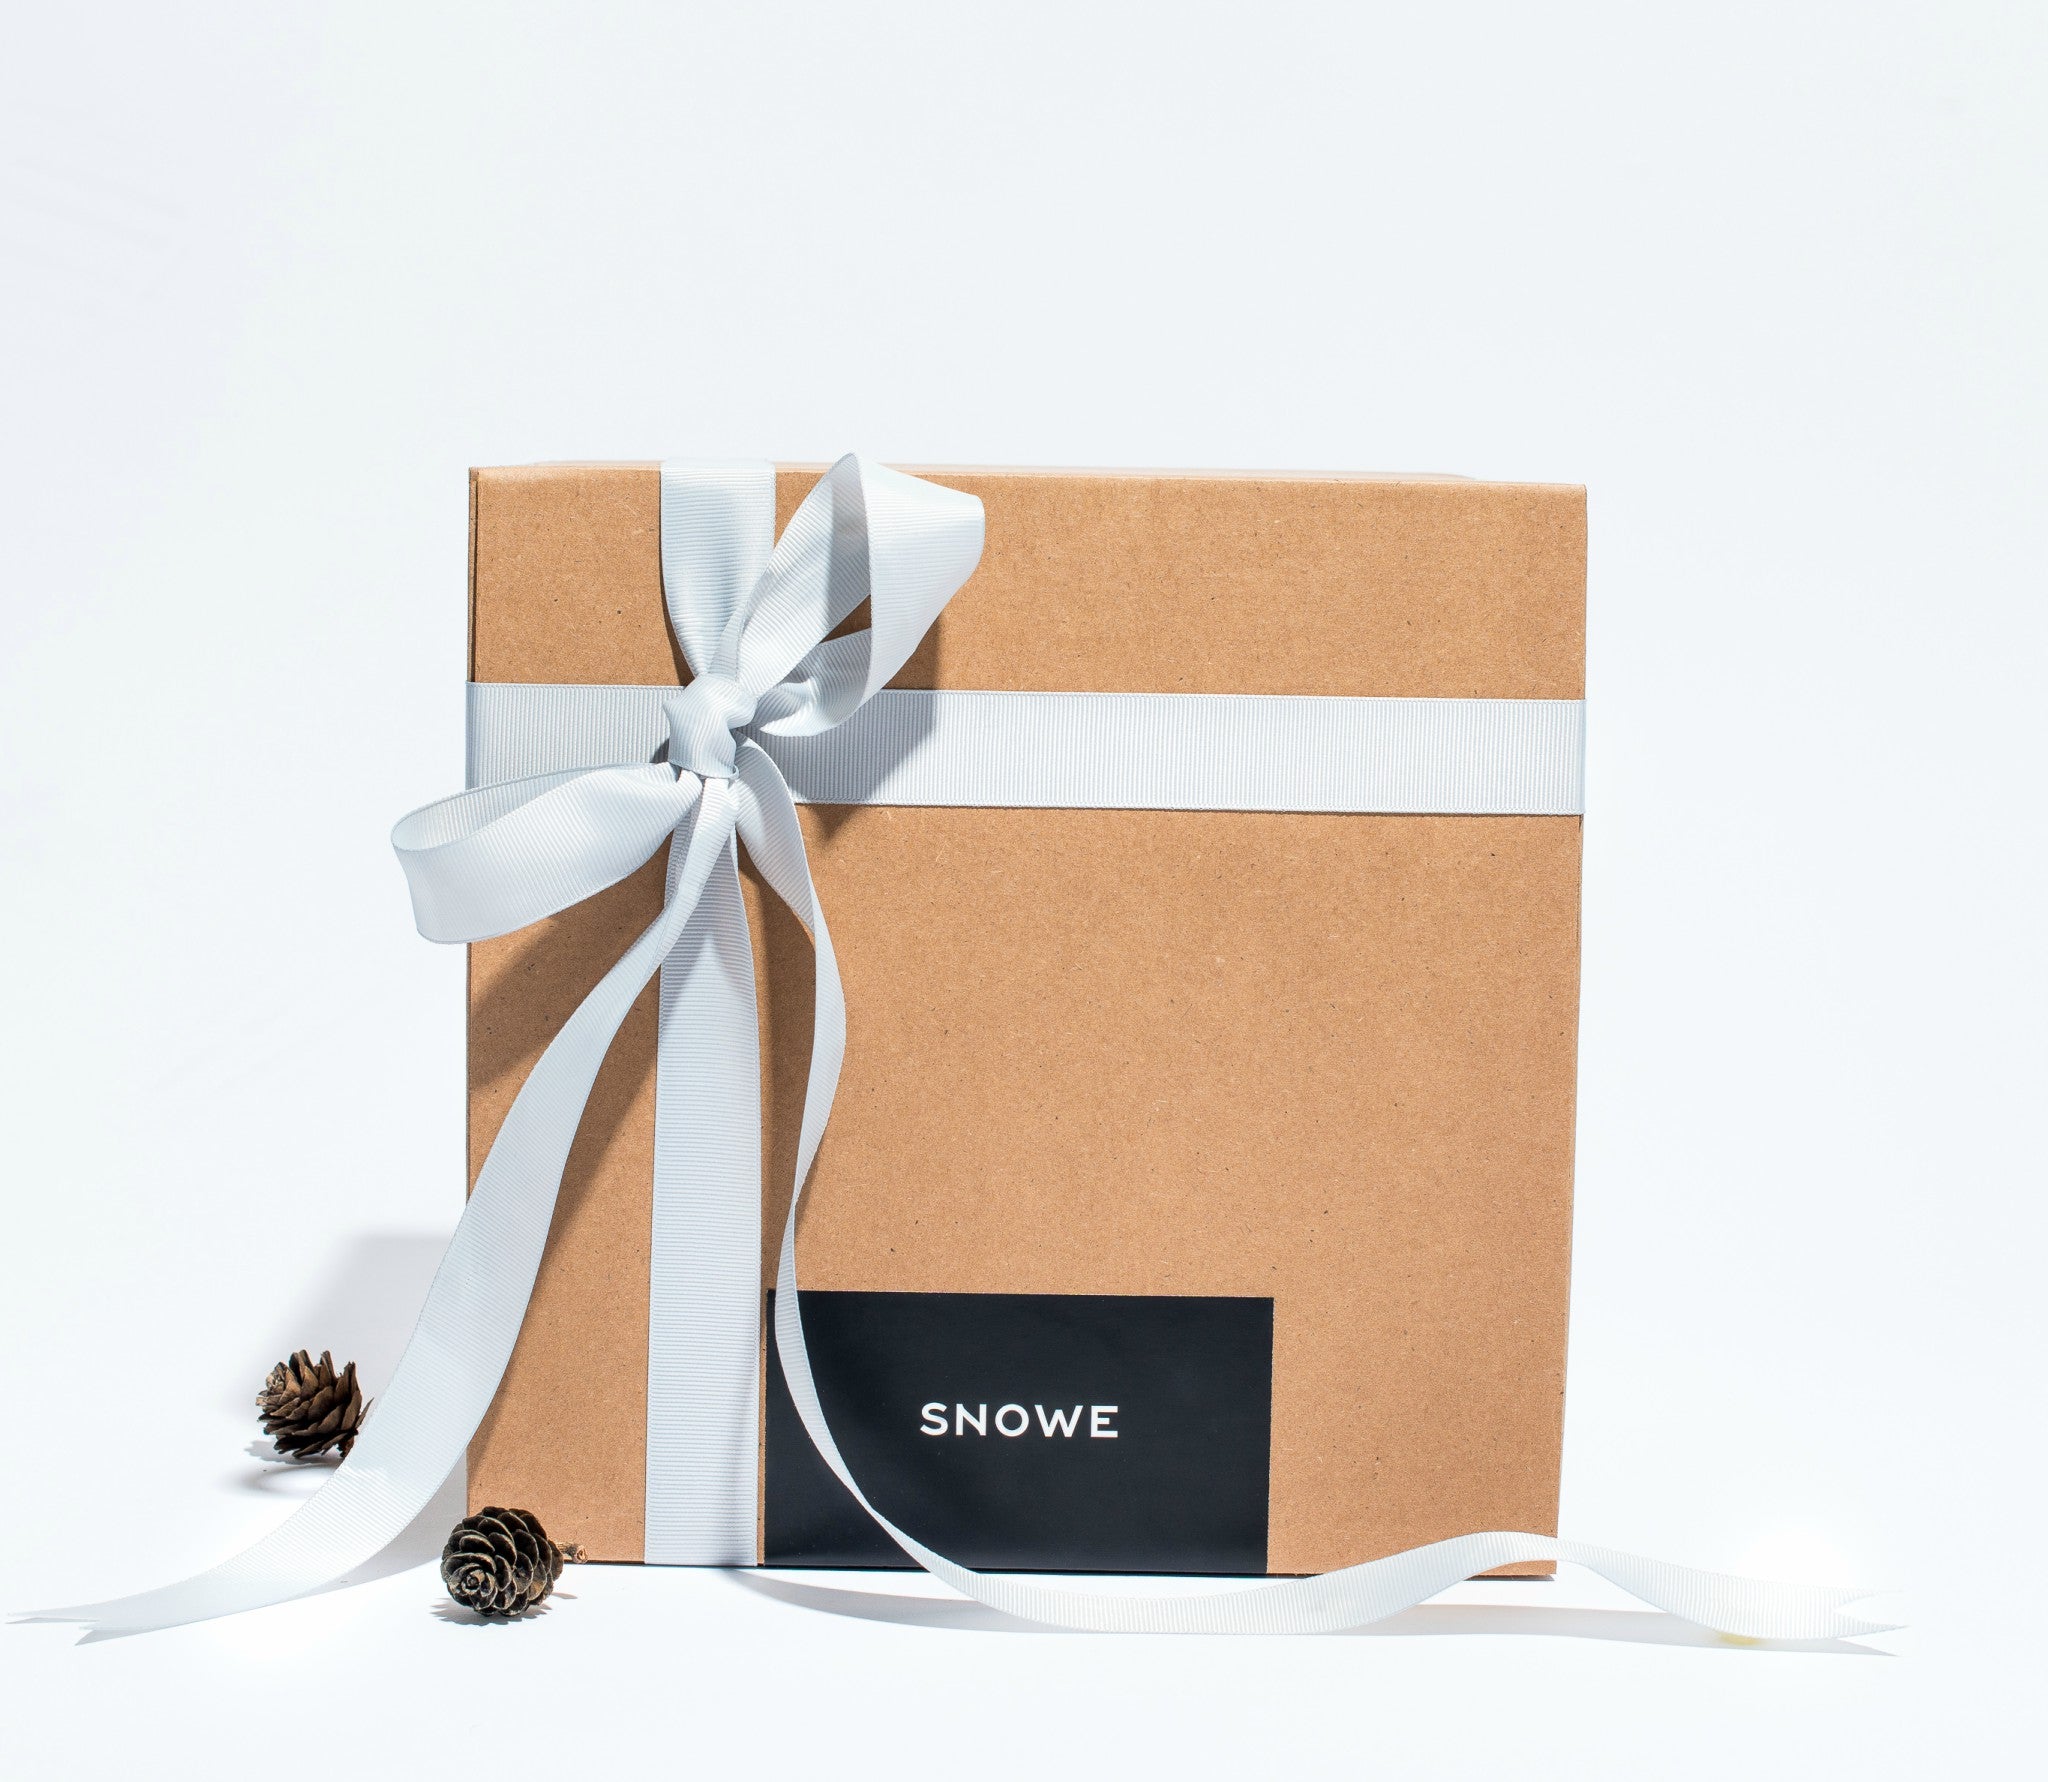 Snowe's Holiday Gift Guide